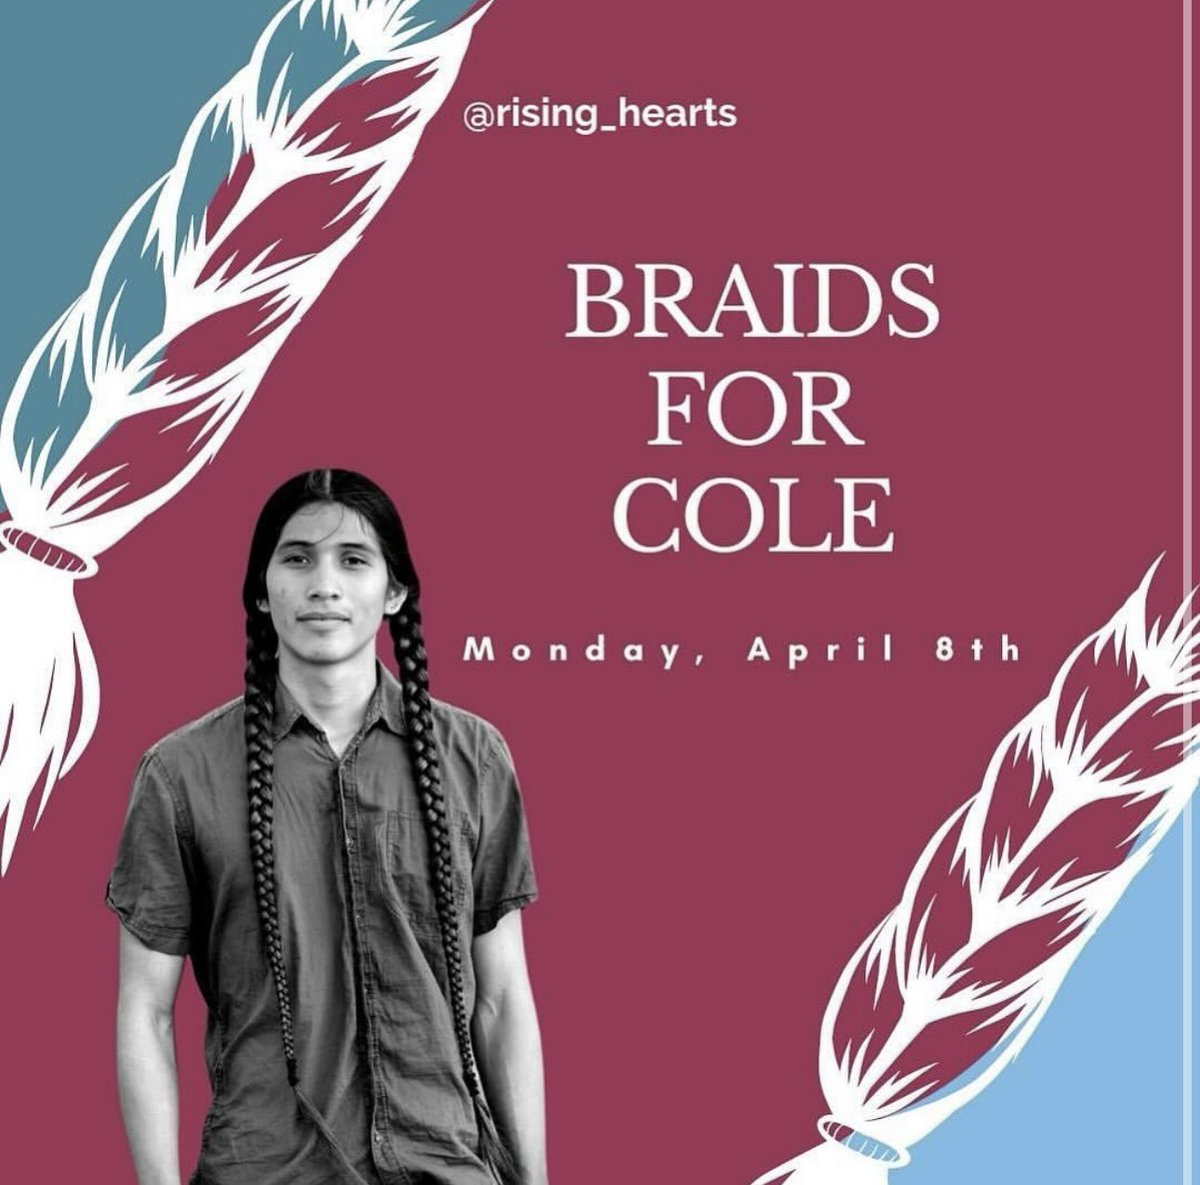 Our hair is sacred. Braids our sacred. Connects us to our ancestors. To our ceremonies. Cole Brings Plenty, Lakota. Actor, family member, student, was taken from Unči Maka. April 8th wear your braids. Wear 2. We may wear an a community for Cole and his family. #ColeBringsPlenty